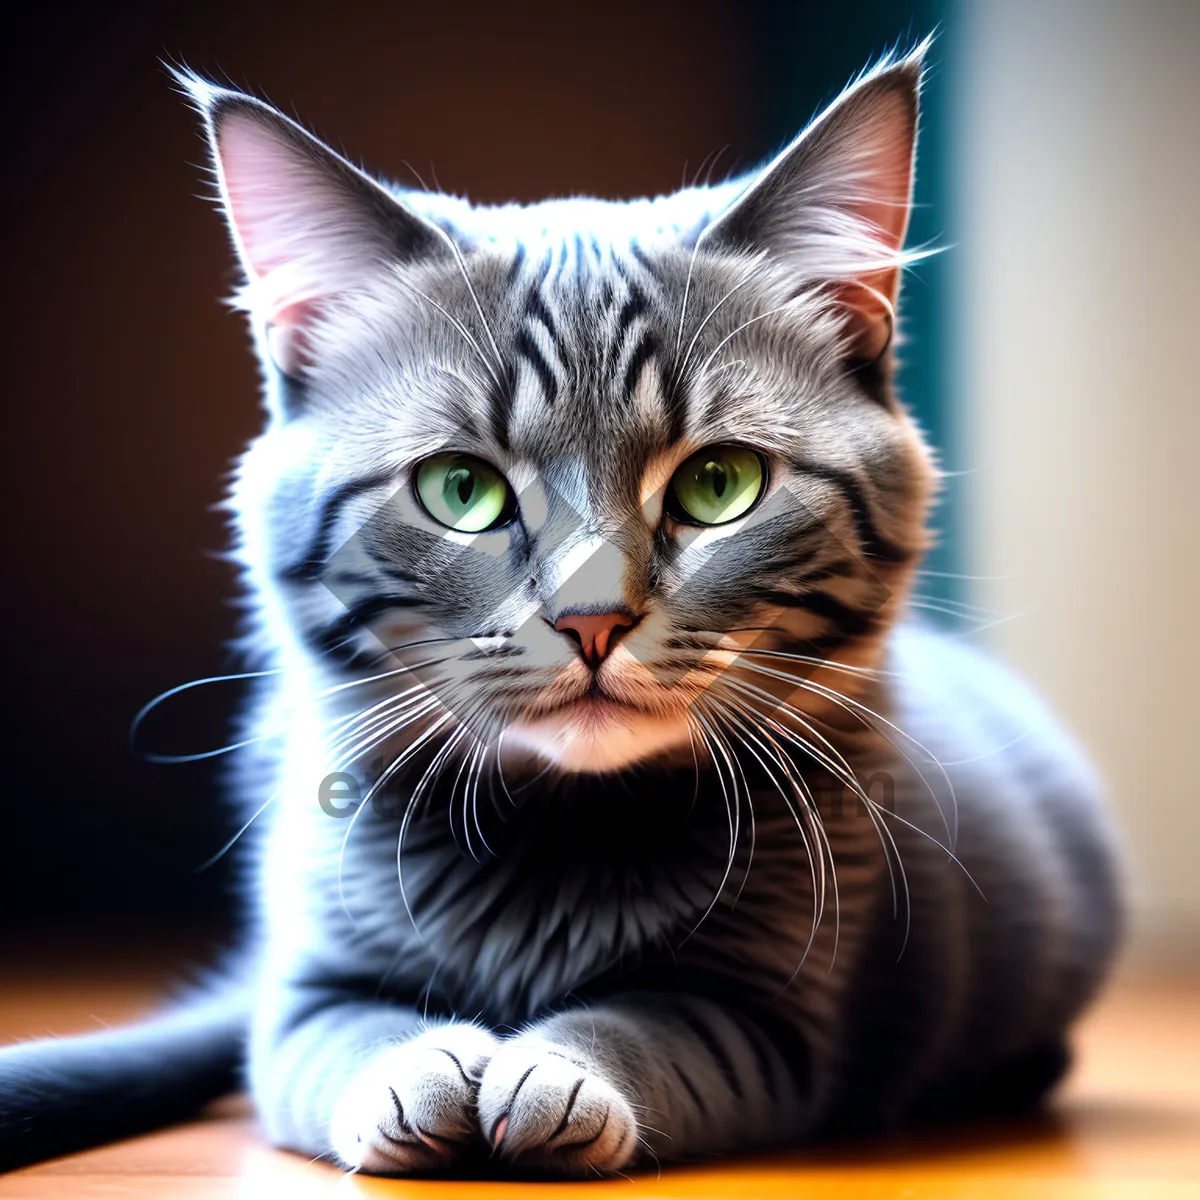 Picture of Adorable Tabby Cat with Curious Whiskers